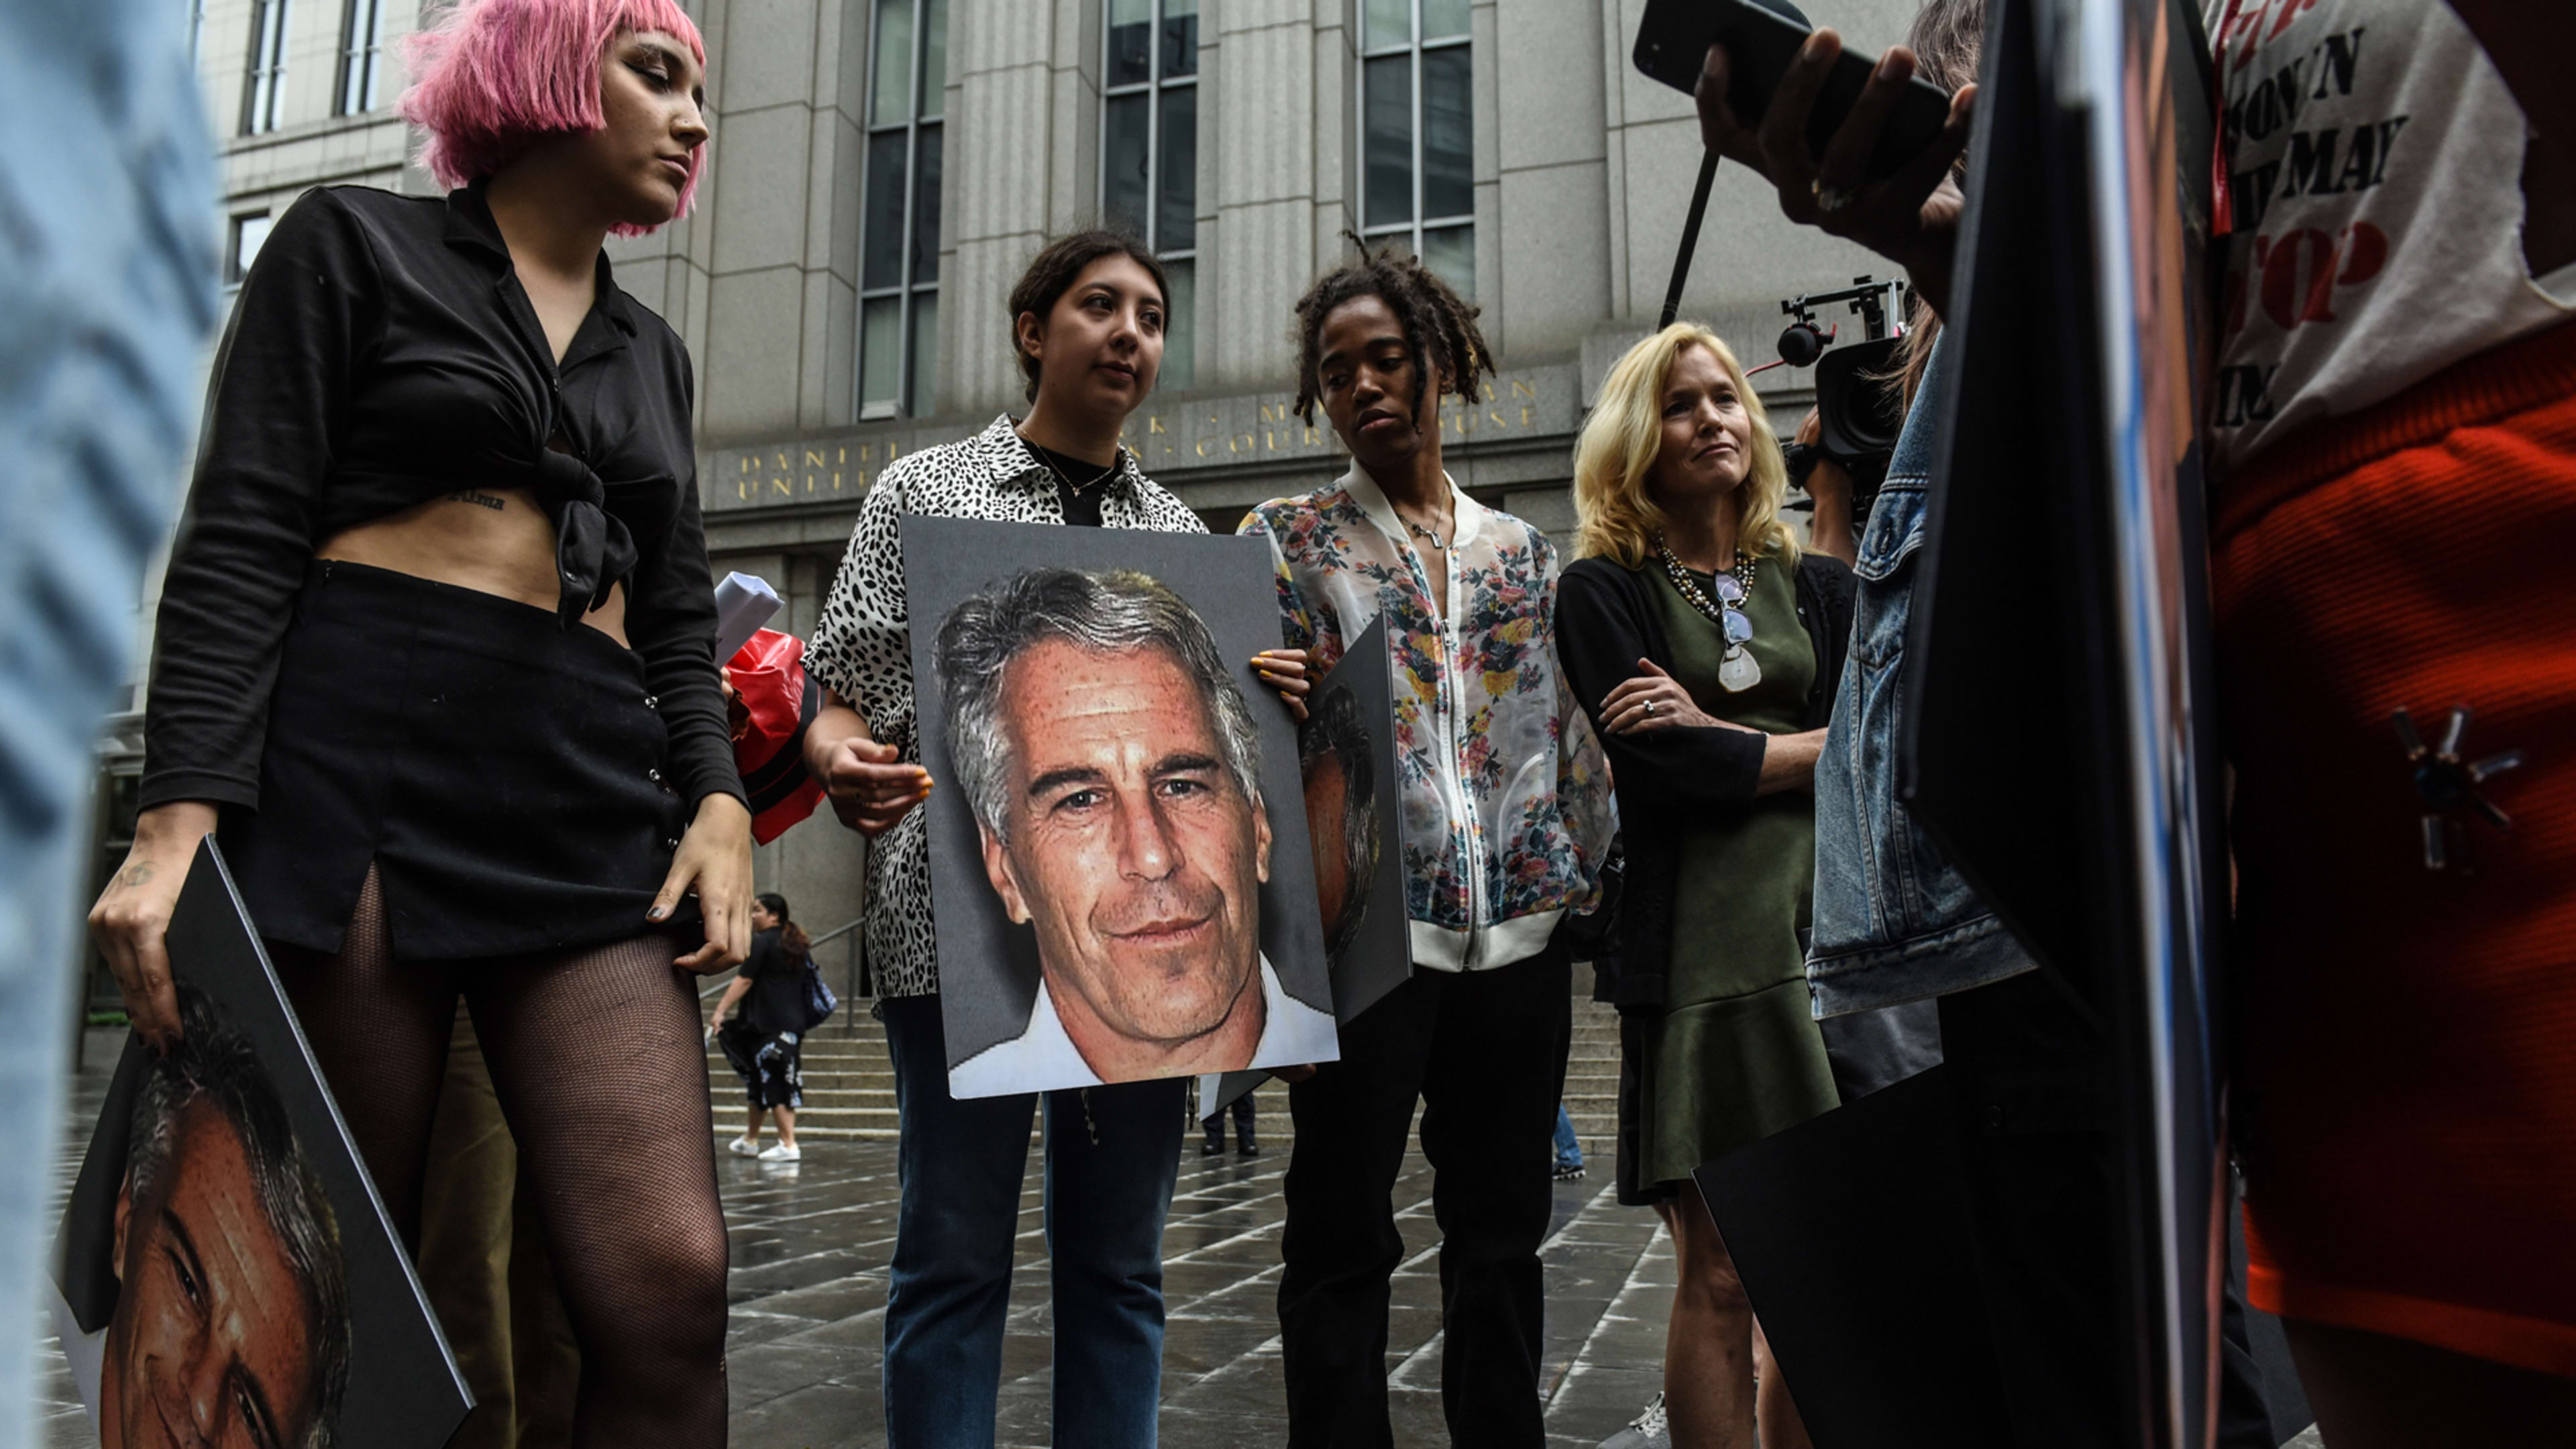 MIT’s damning report on Jeffrey Epstein attempts to exonerate its president